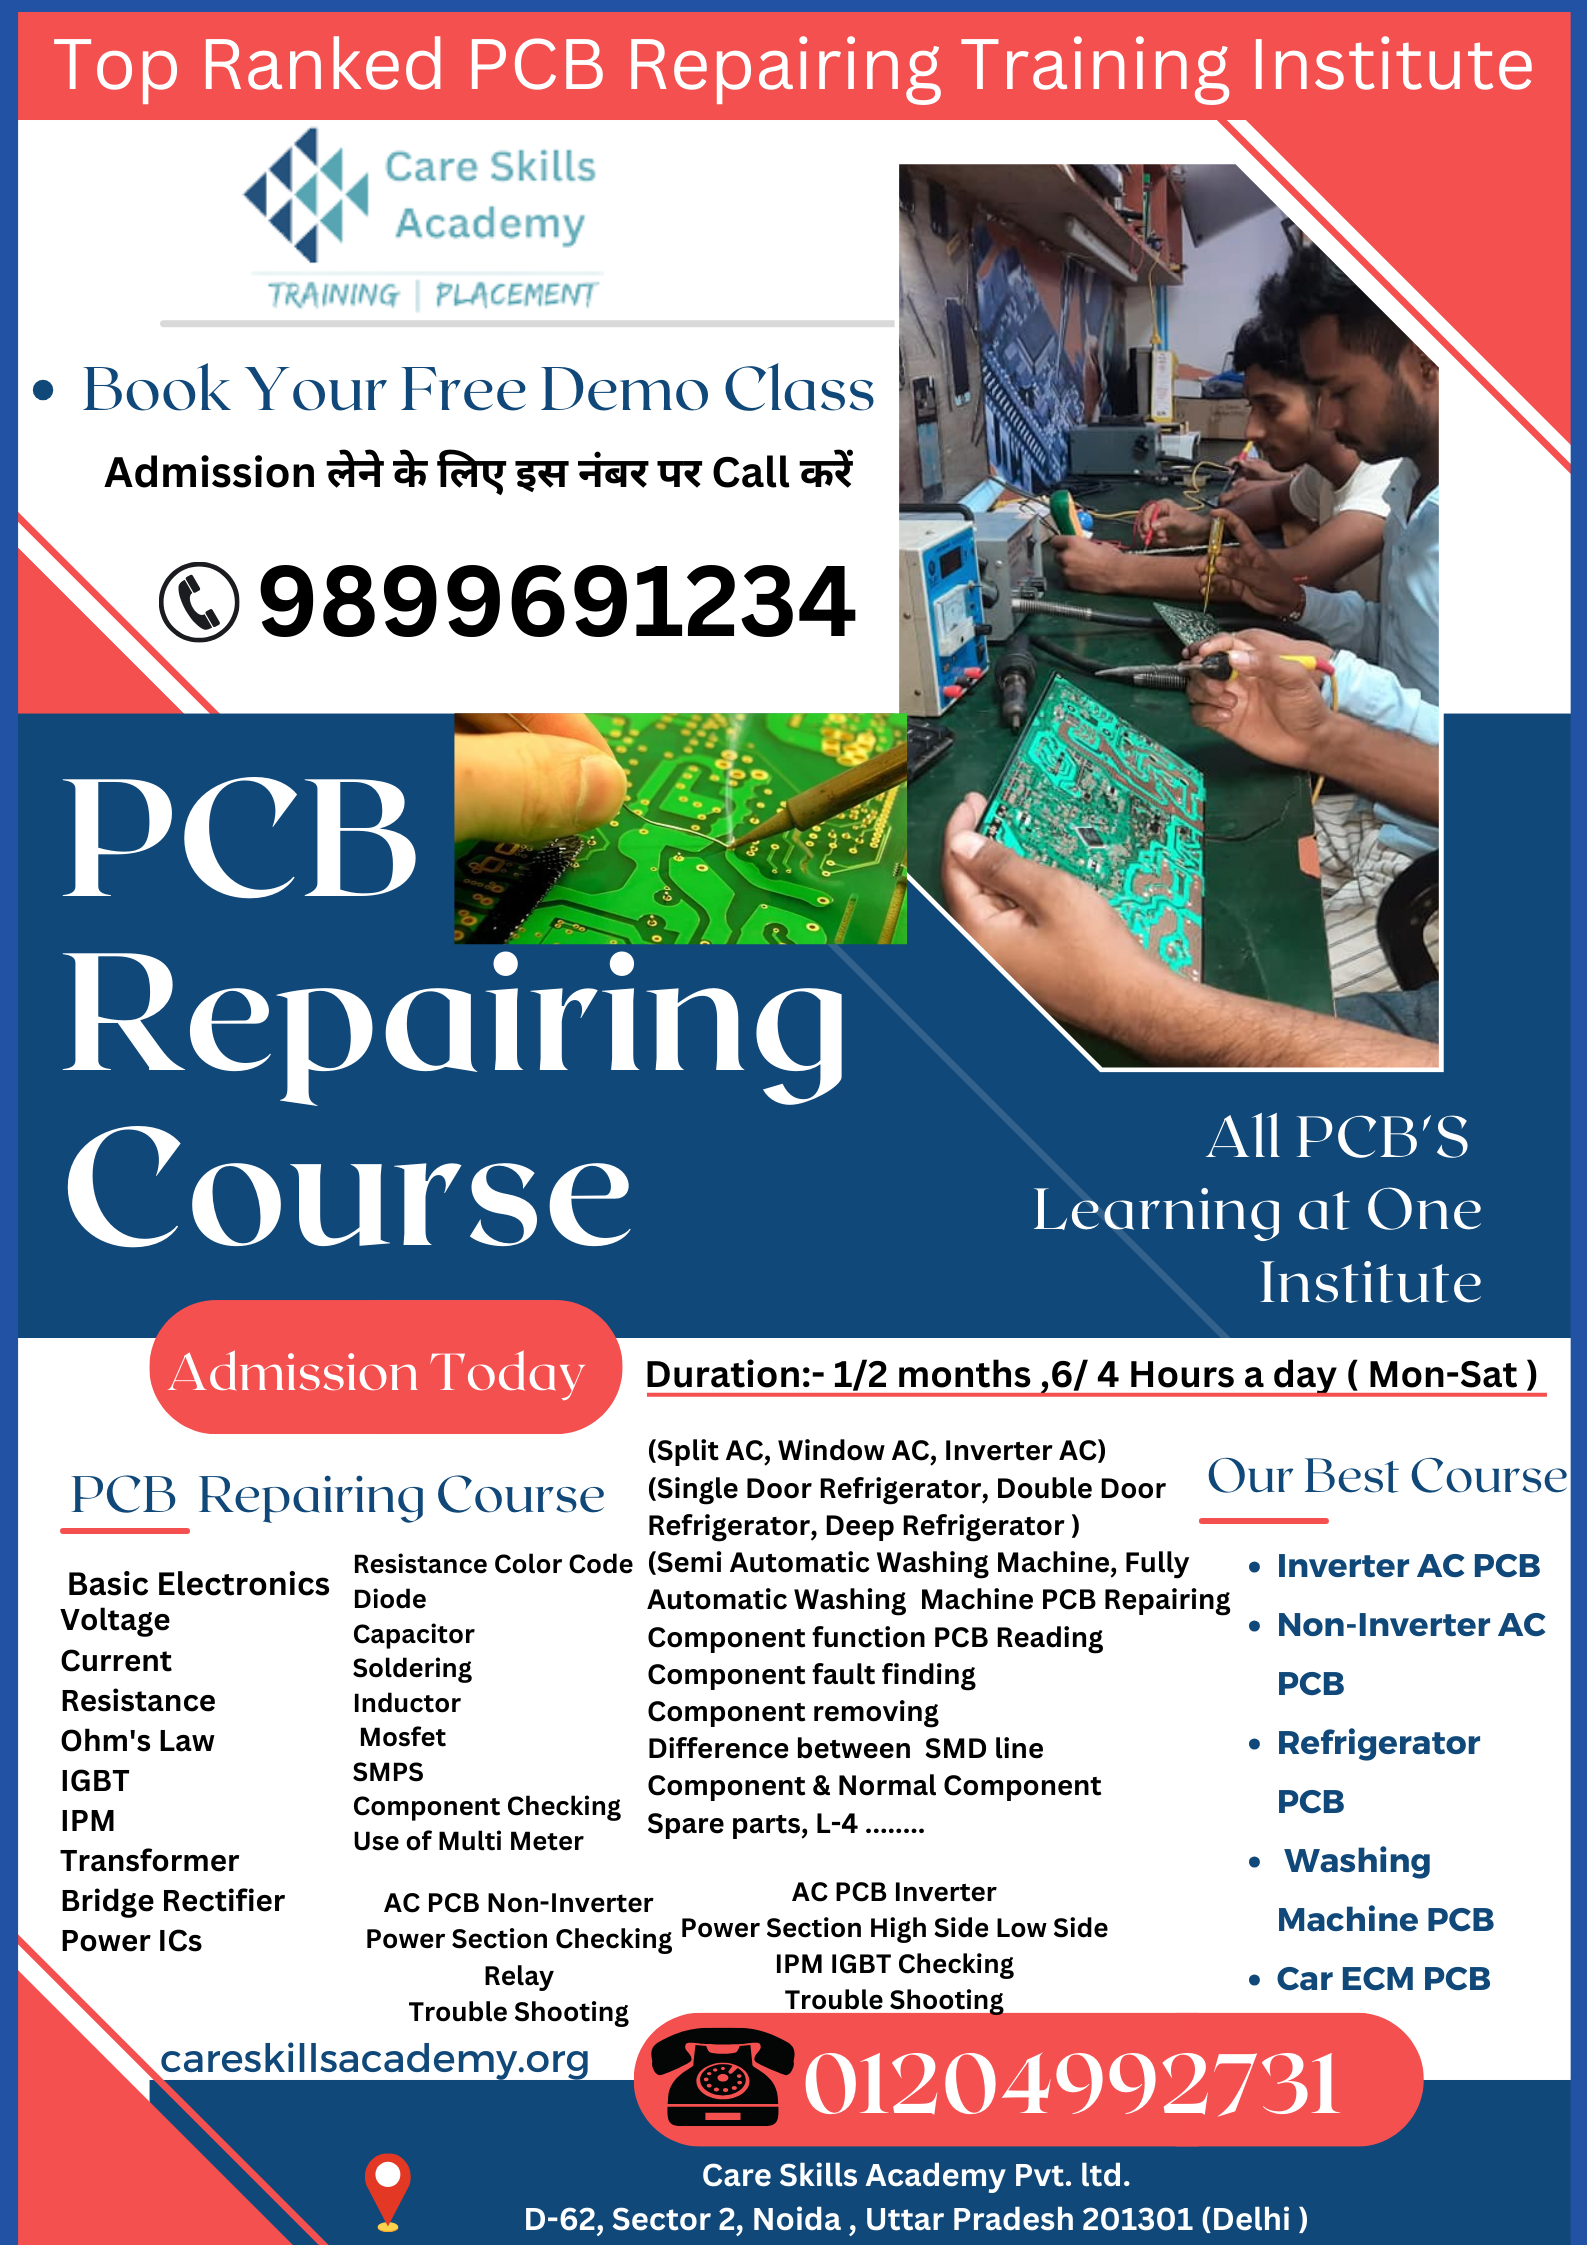 New PCB Repairing Course in Delhi at Care Skills Academy | +91-9899691234